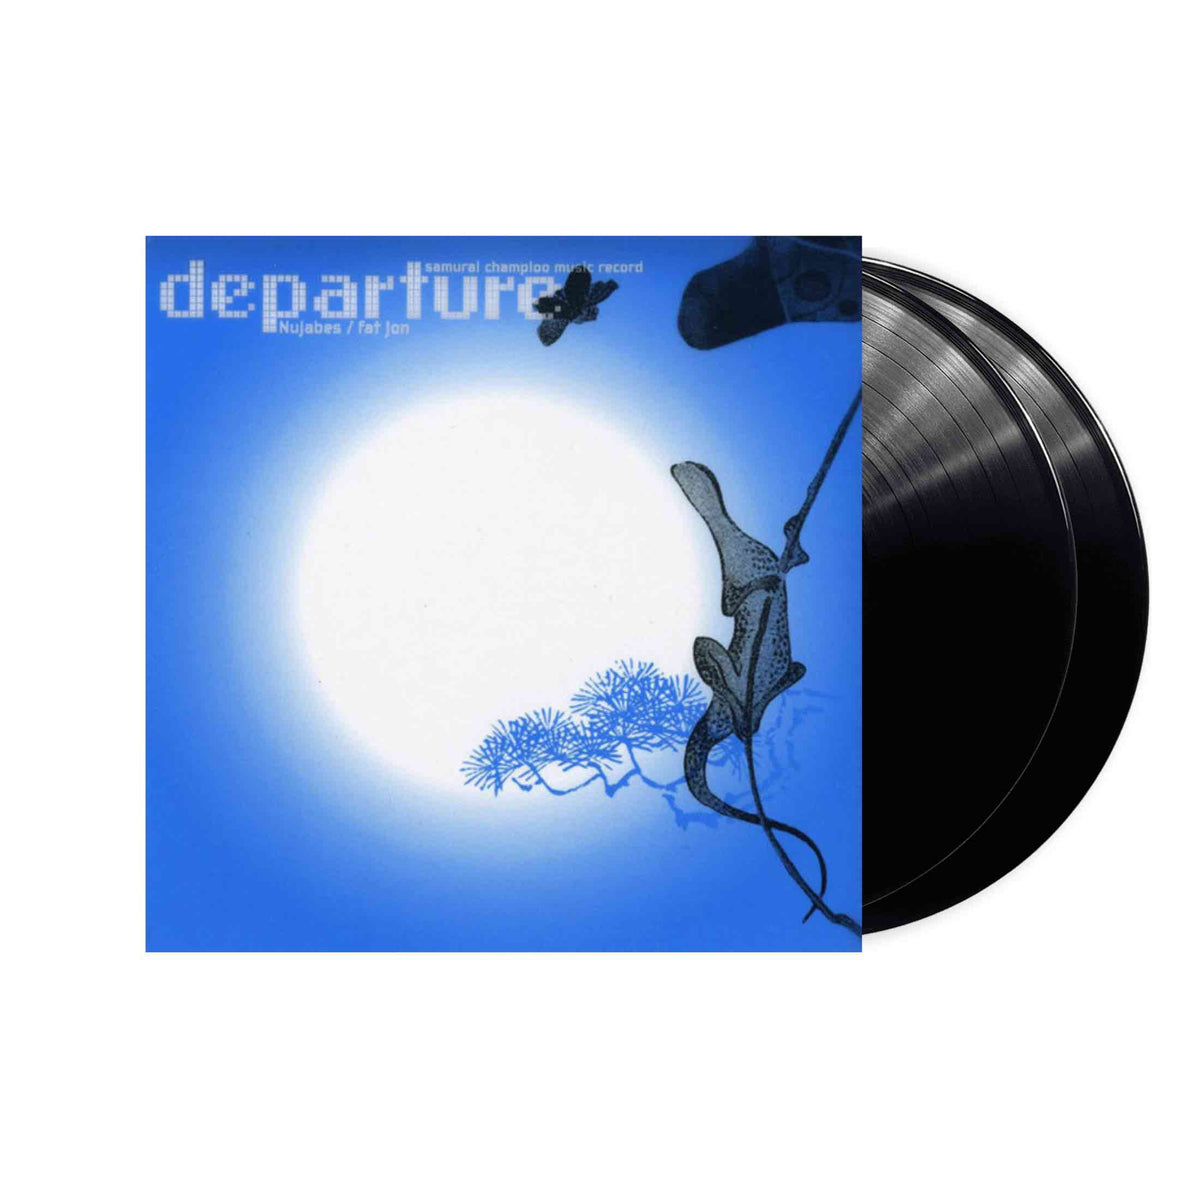 Nujabes and Fat Jon - Samurai Champloo Music Record: Departure ...